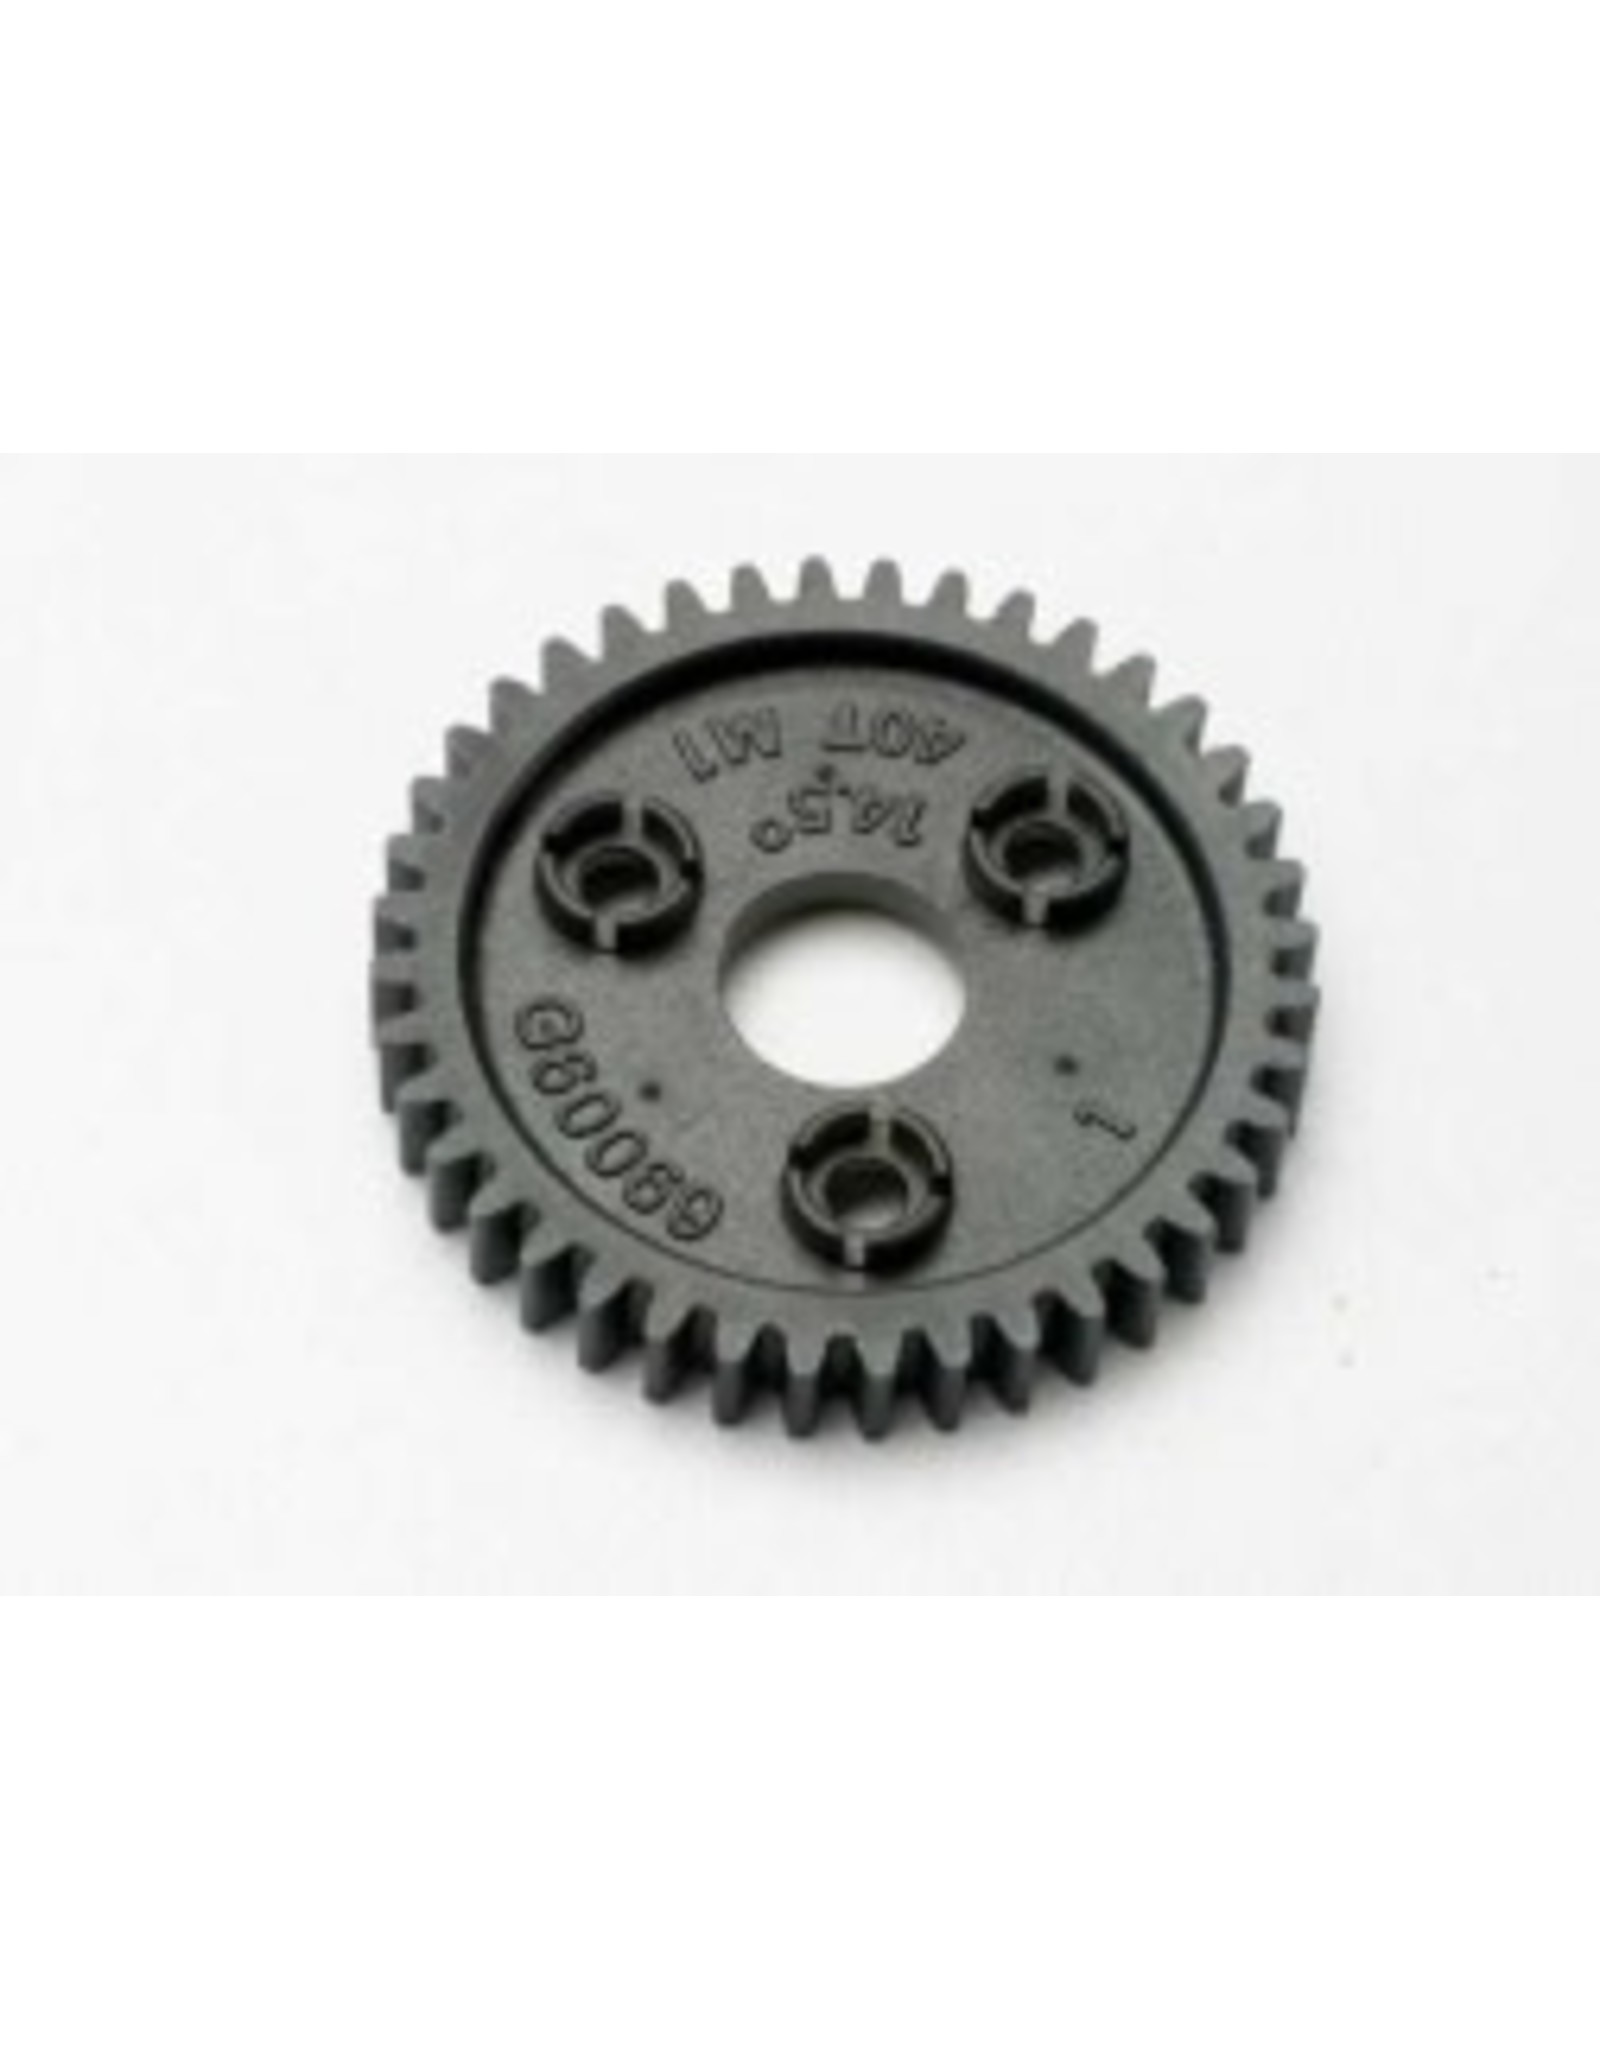 Traxxas Spur gear, 40-tooth (1.0 metric pitch)